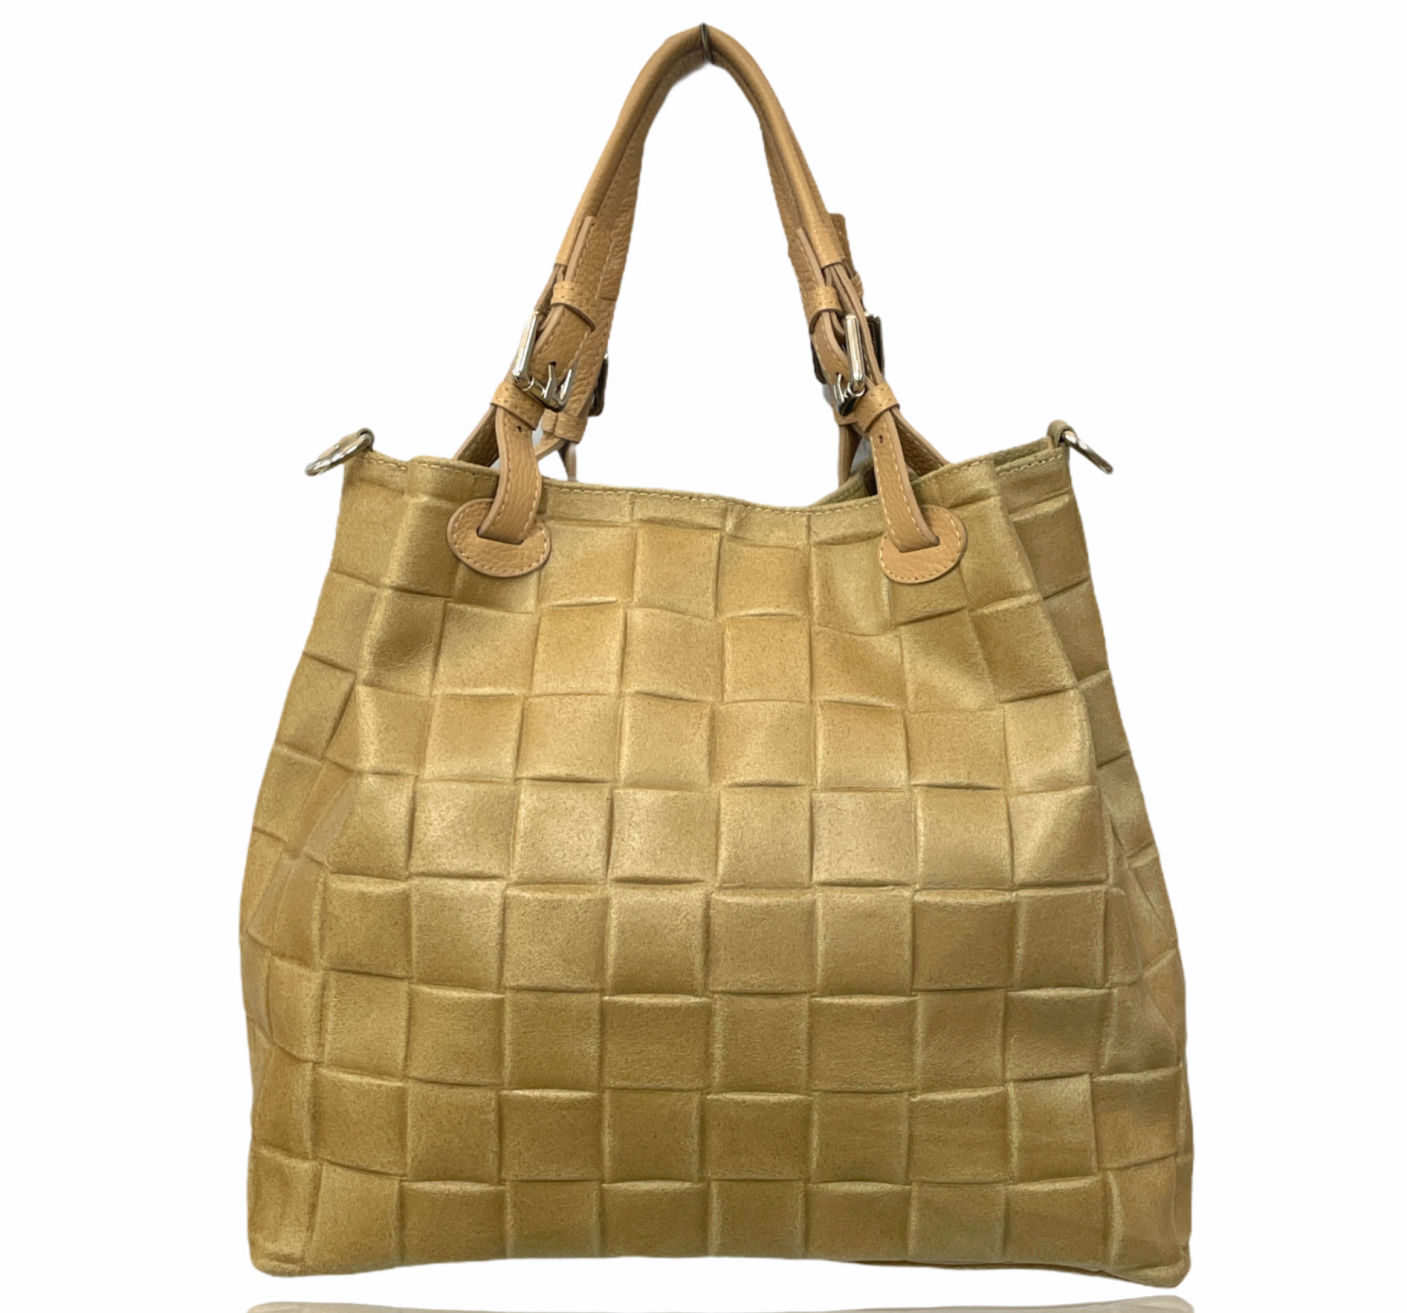 Luxury bags made in Italy: wholesale suppliers and brands